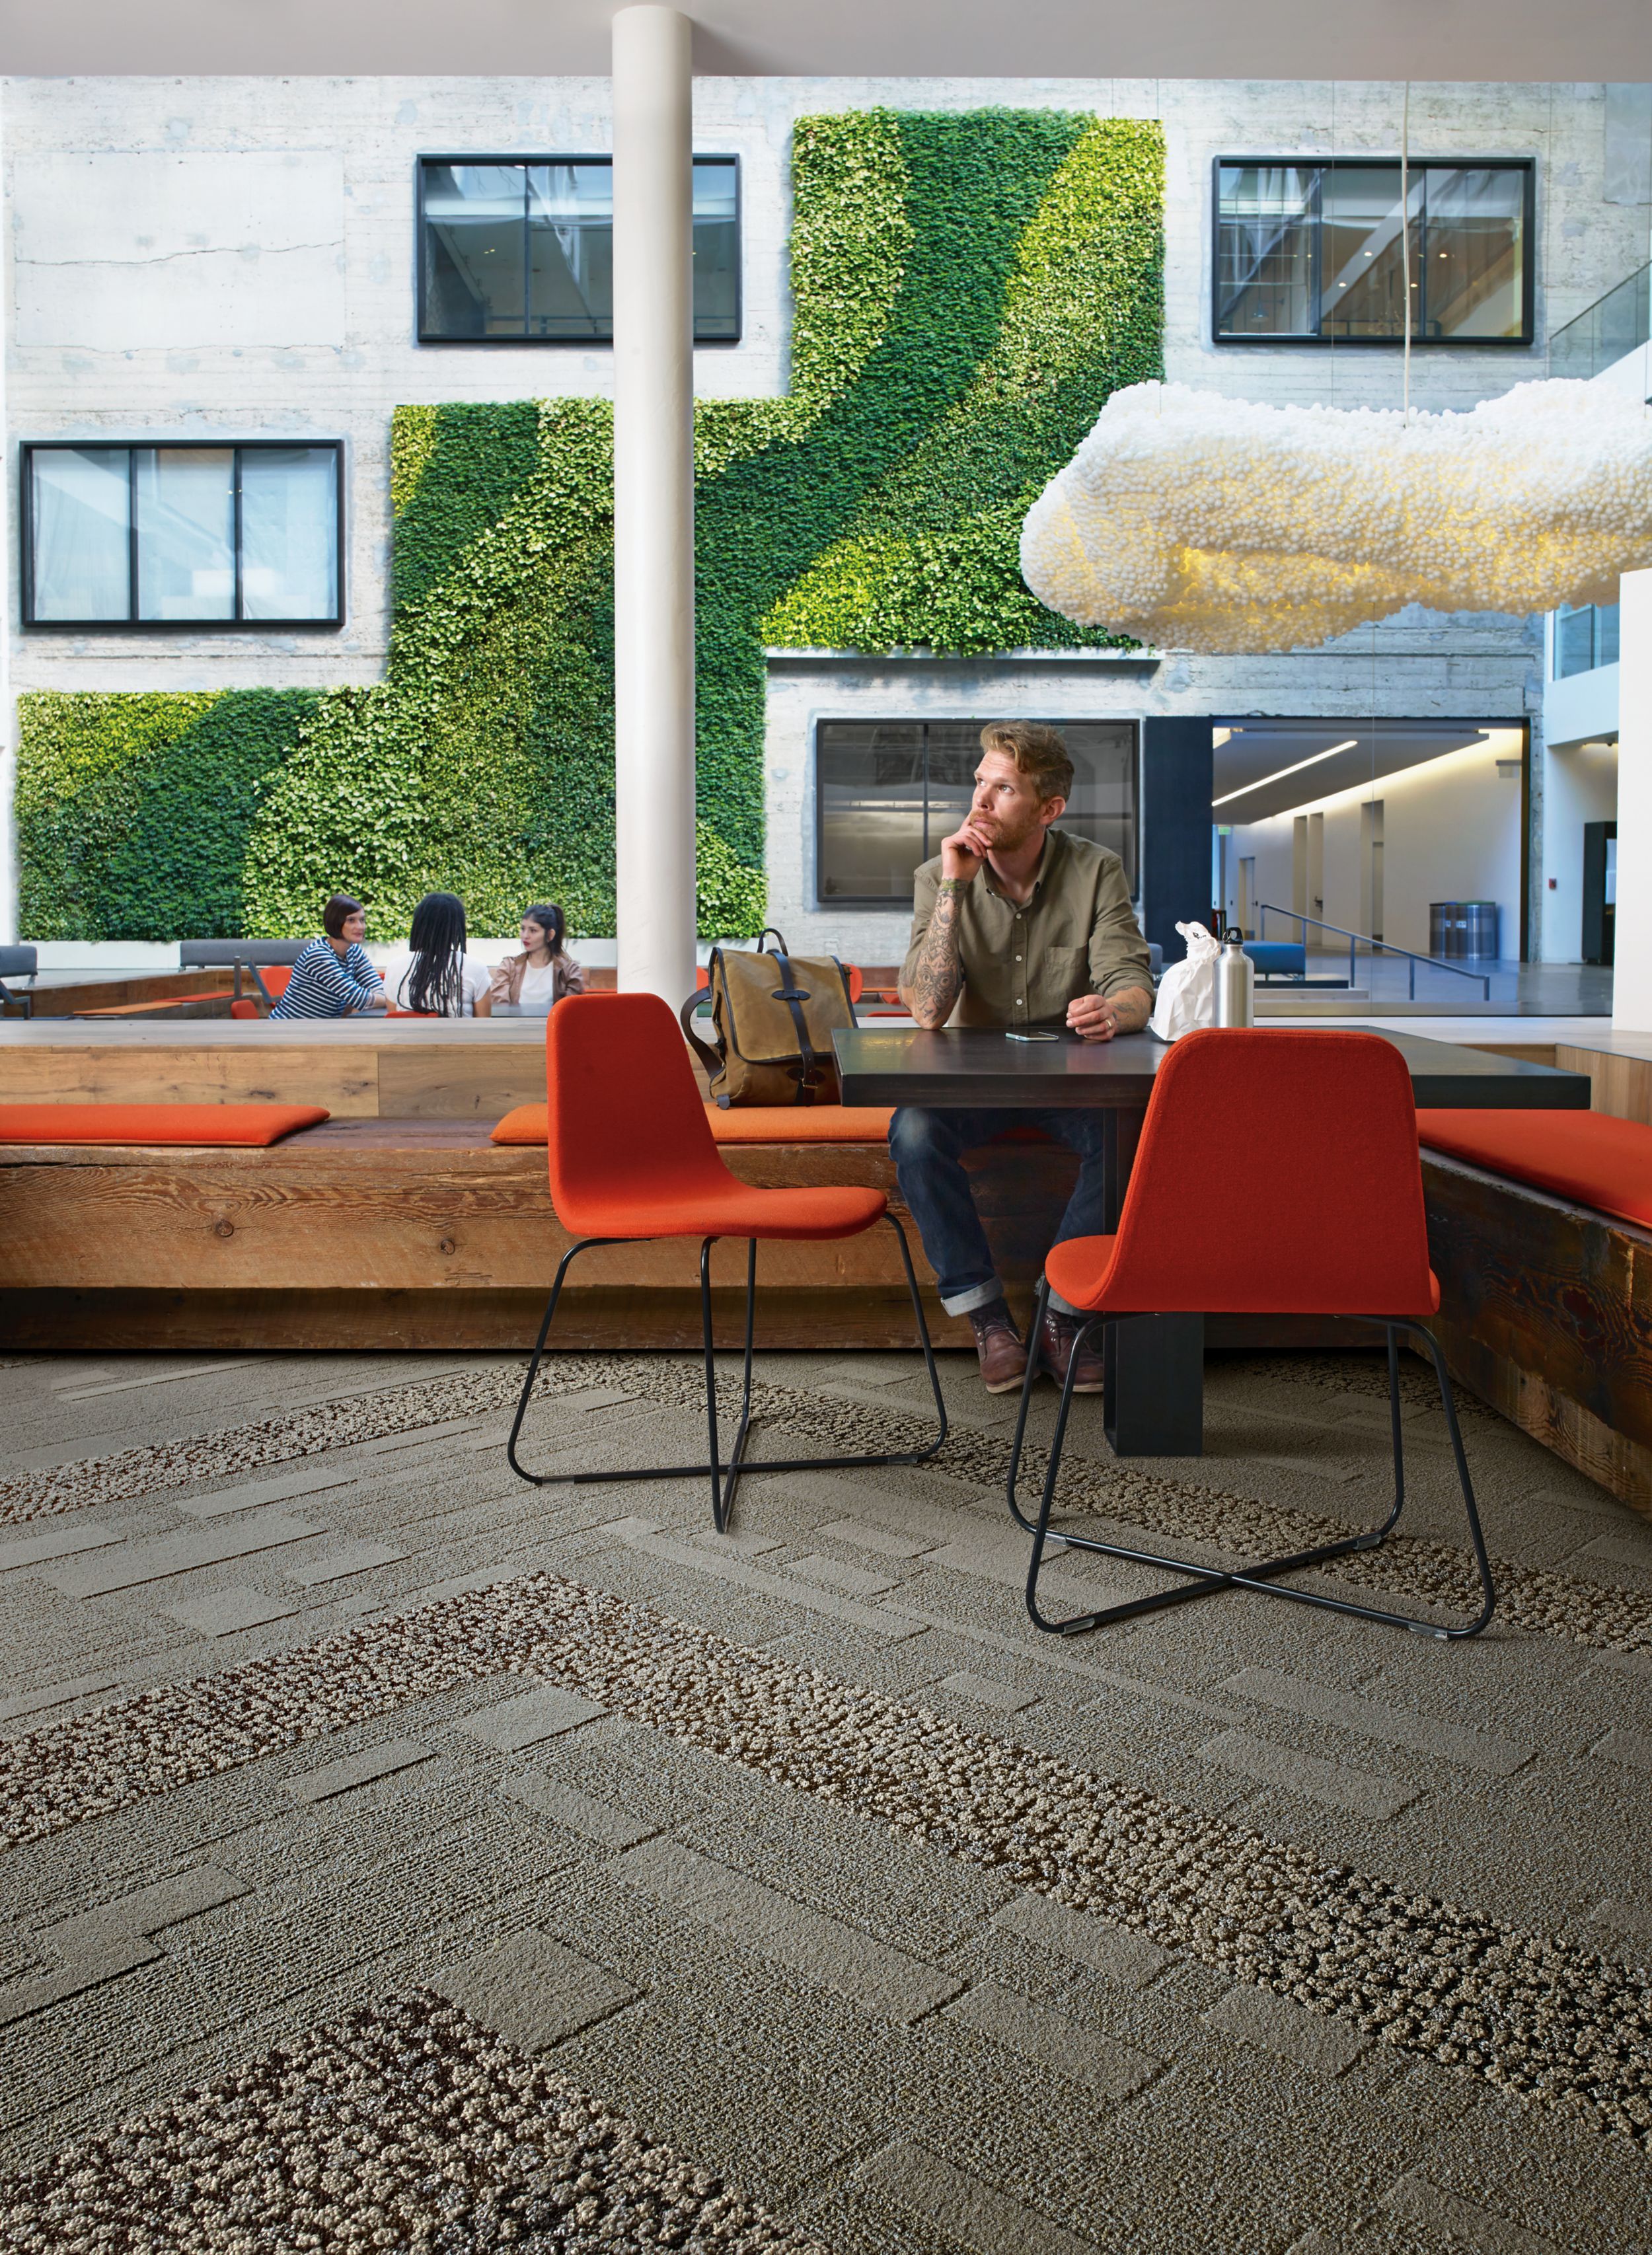 image Interface EM552 plank carpet tile with man sitting at table with lunch and group meeting in front of vine wall in the background  numéro 7